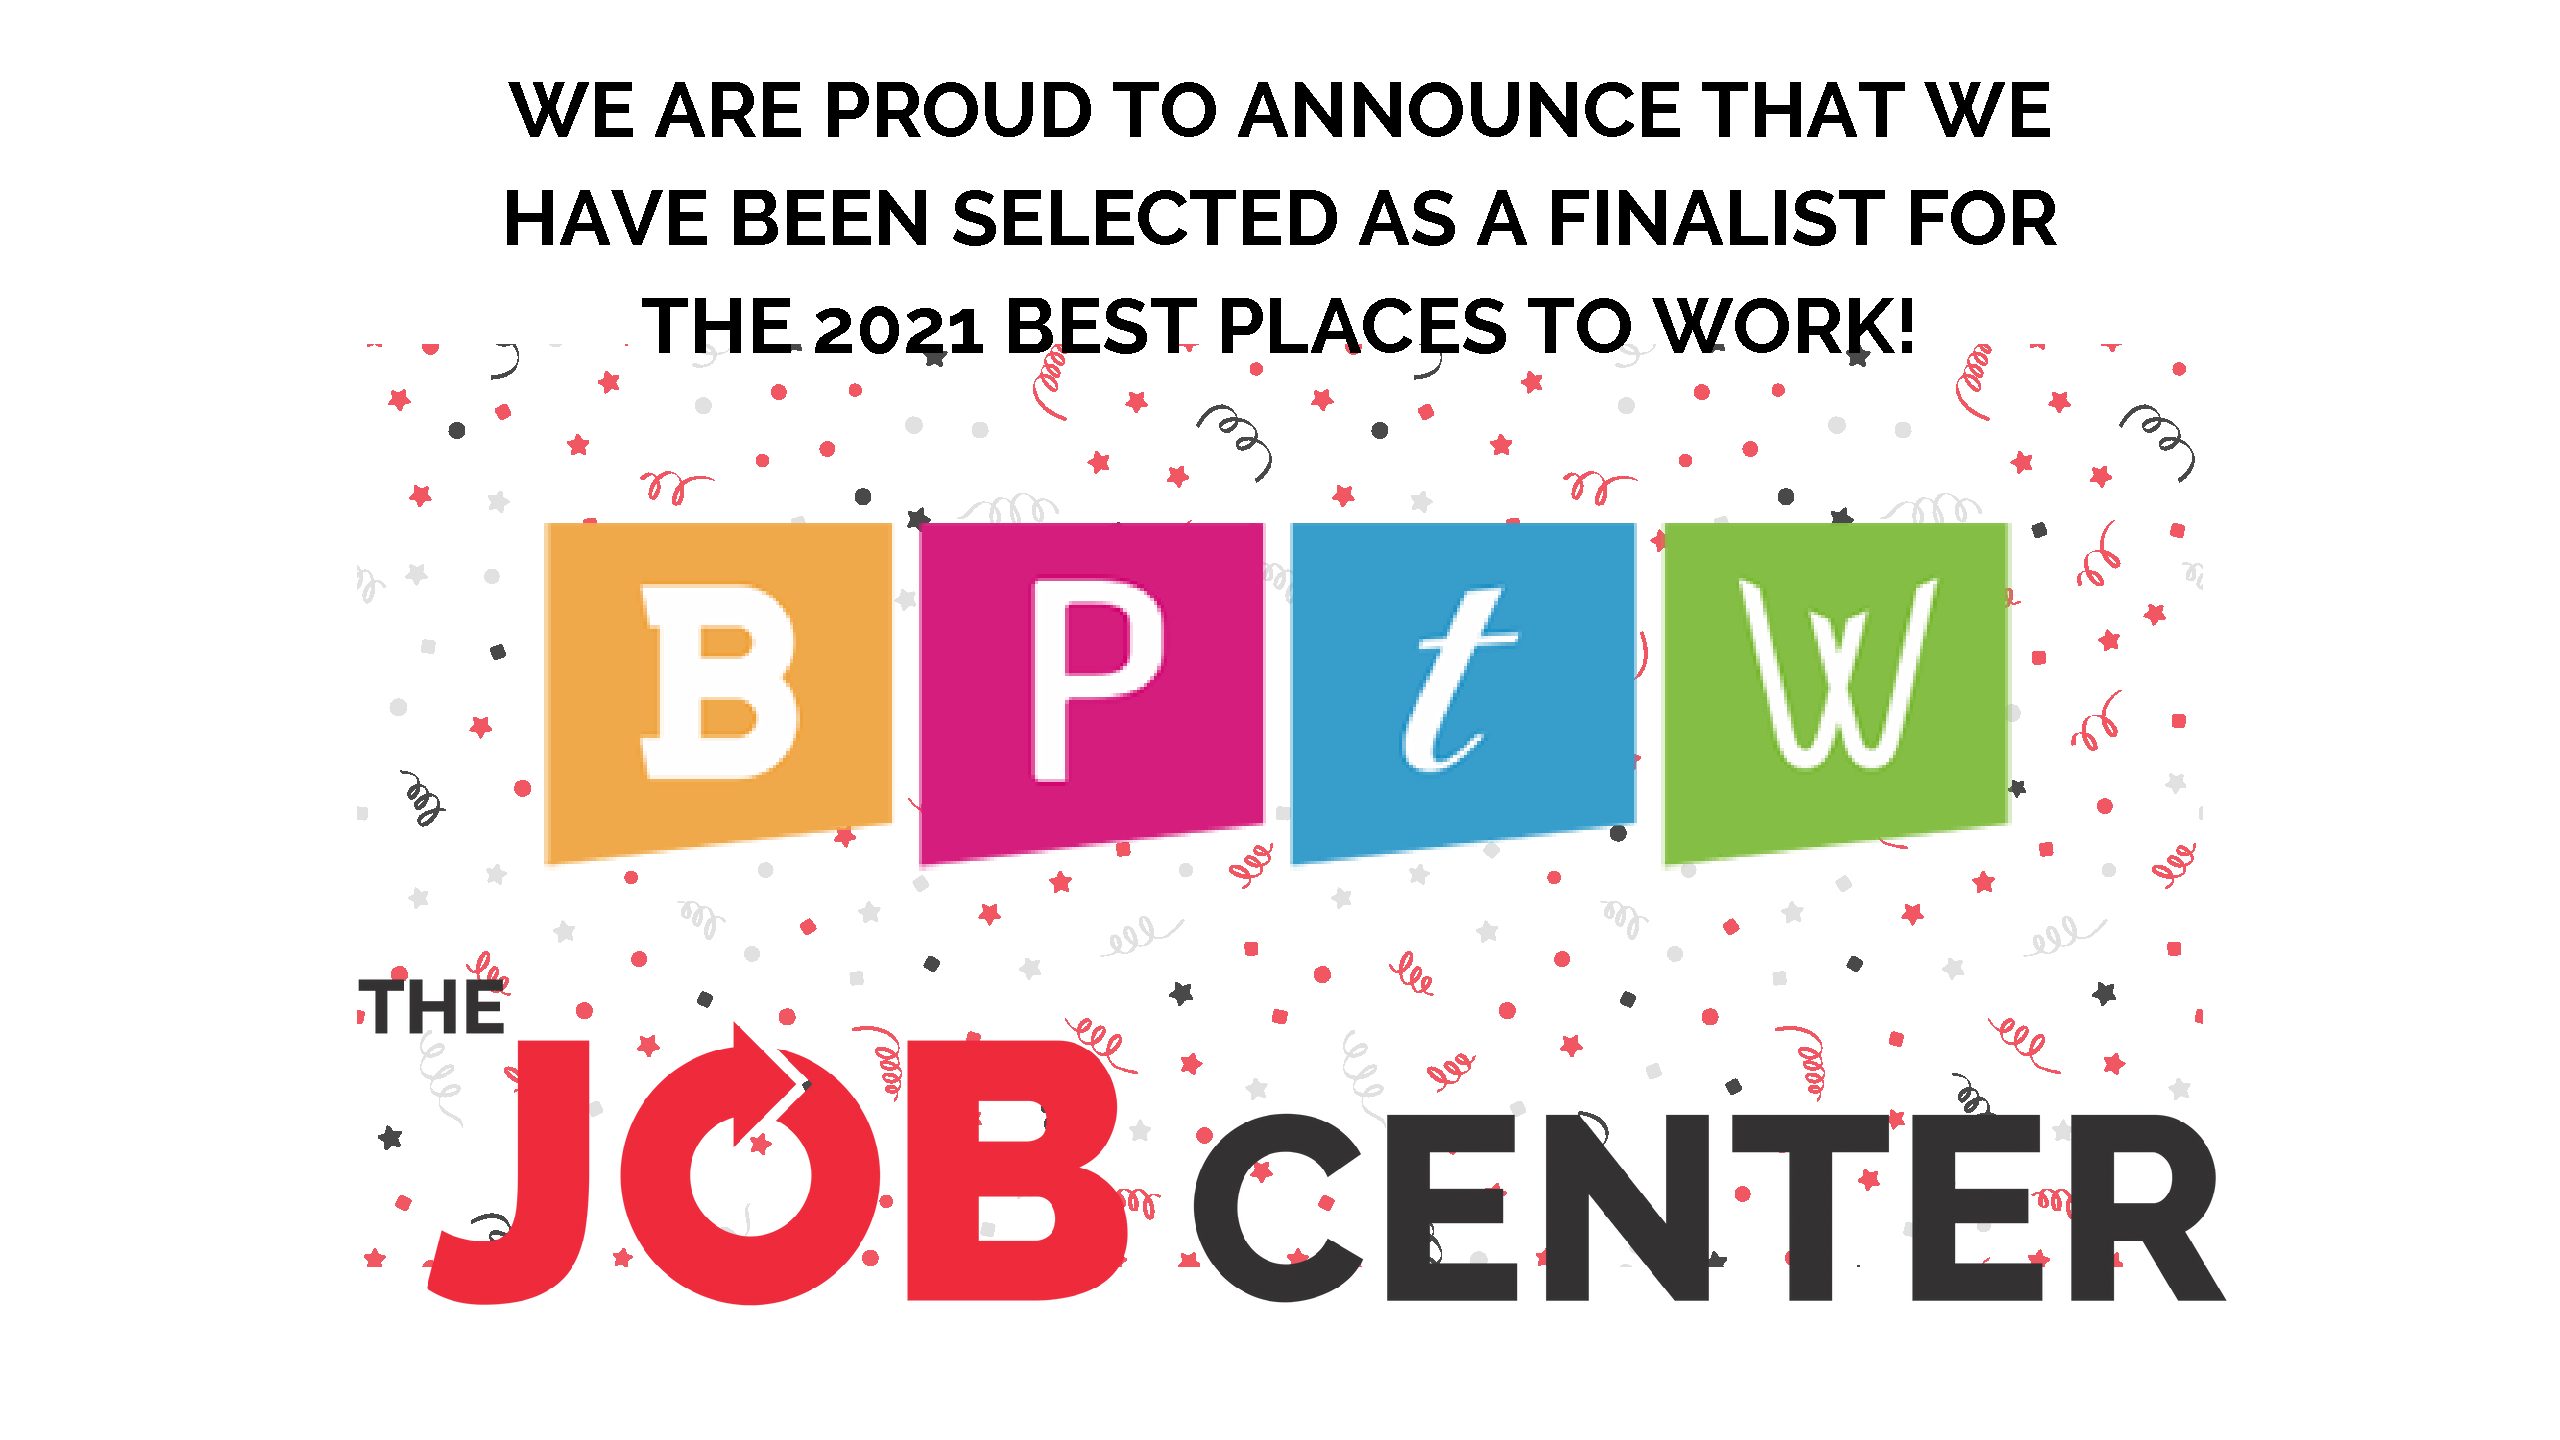 TJC NAMED 2021 BEST PLACE TO WORK